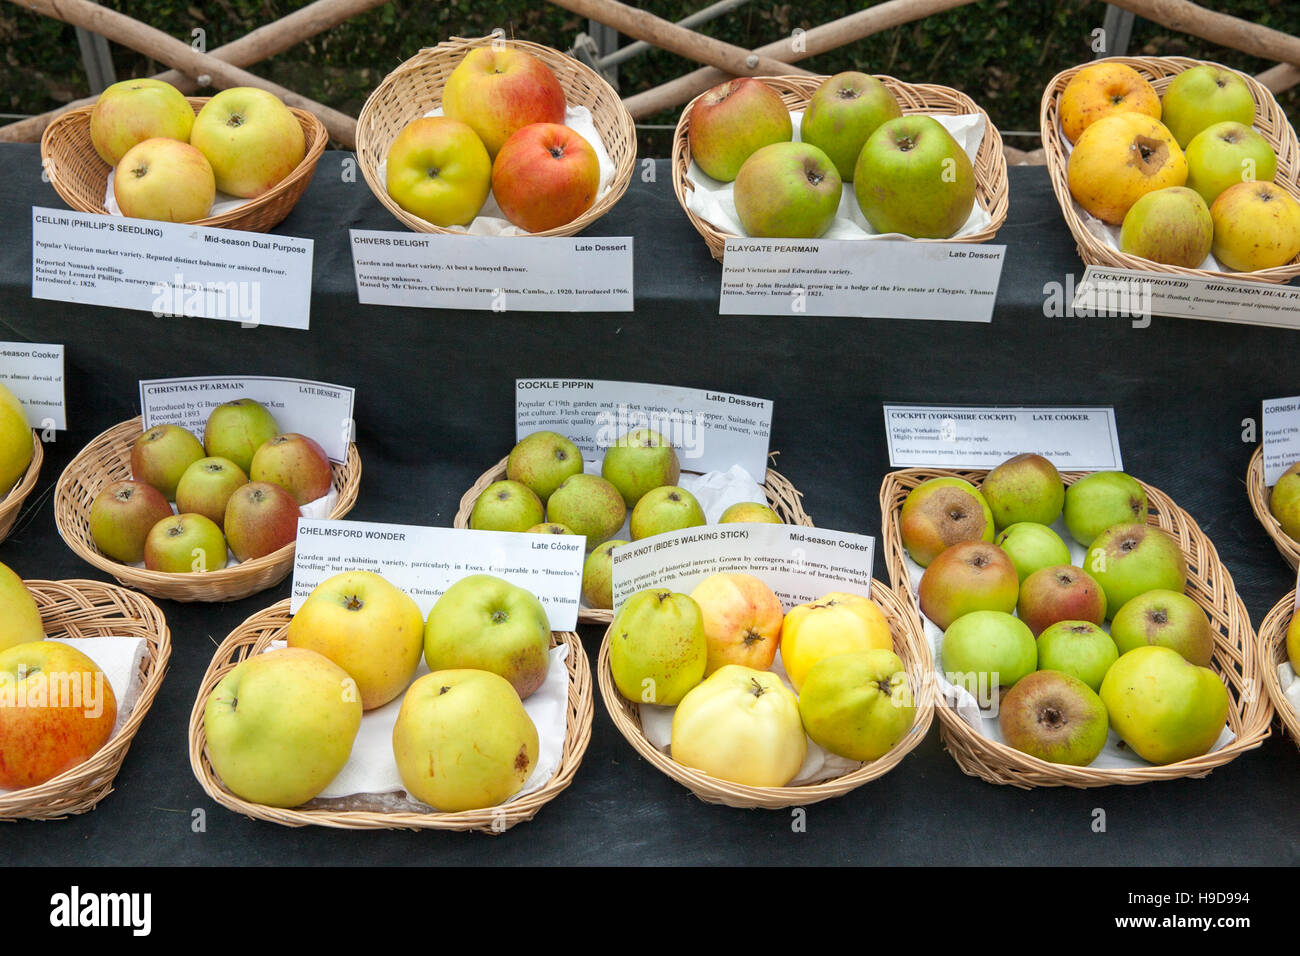 Apples on display at an agricultural show Stock Photo